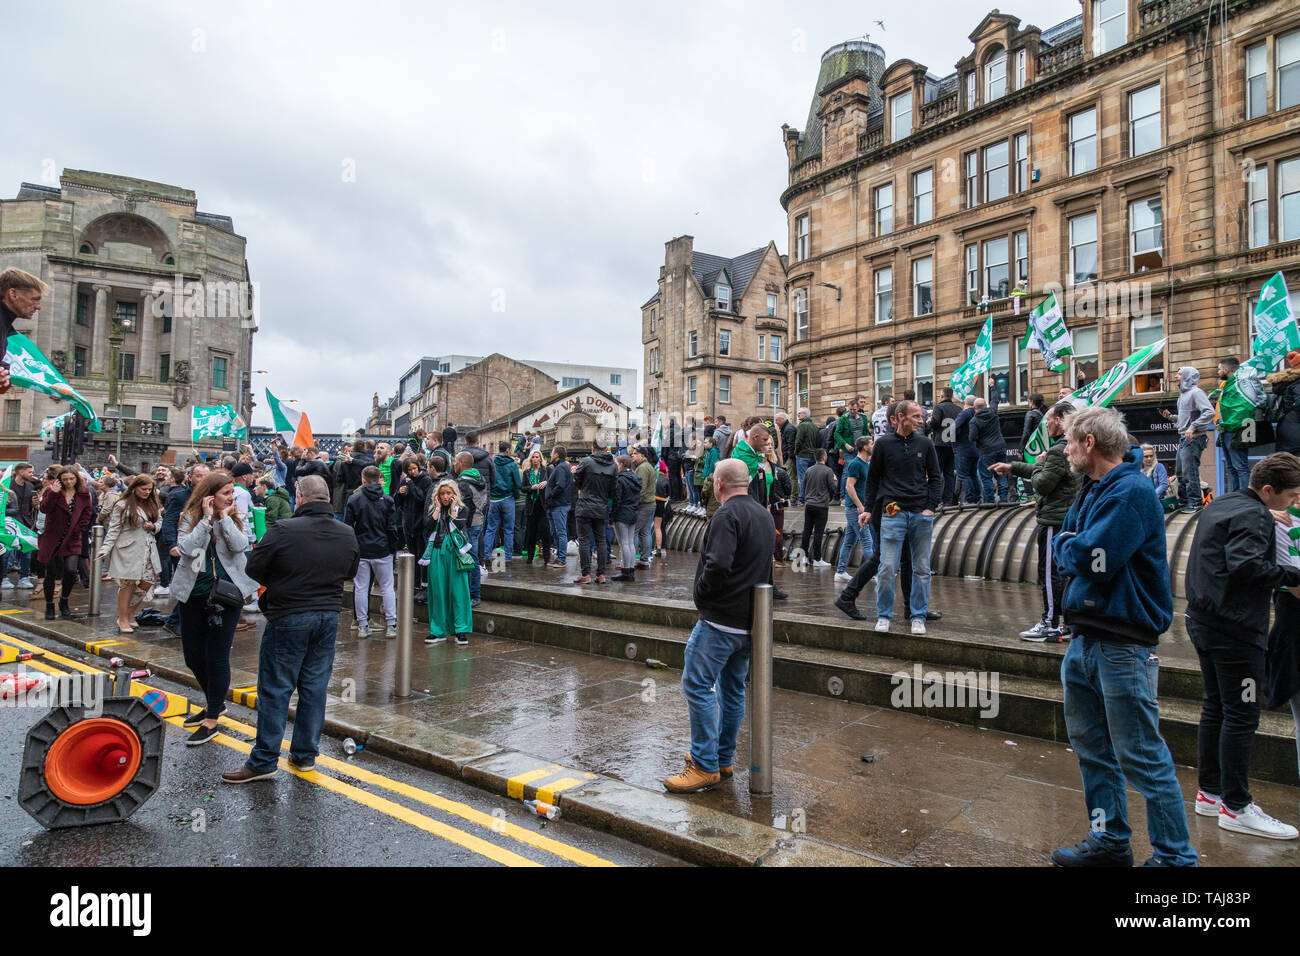 Glasgow Celtic football club win the Scottish Cup against Hearts but the open top parade bus organised afterwards is cancelled amid safety fears.Thousands of fans gathered for almost two hours at the city’s Saltmarket and Glasgow Cross in anticipation of its arrival. Stock Photo